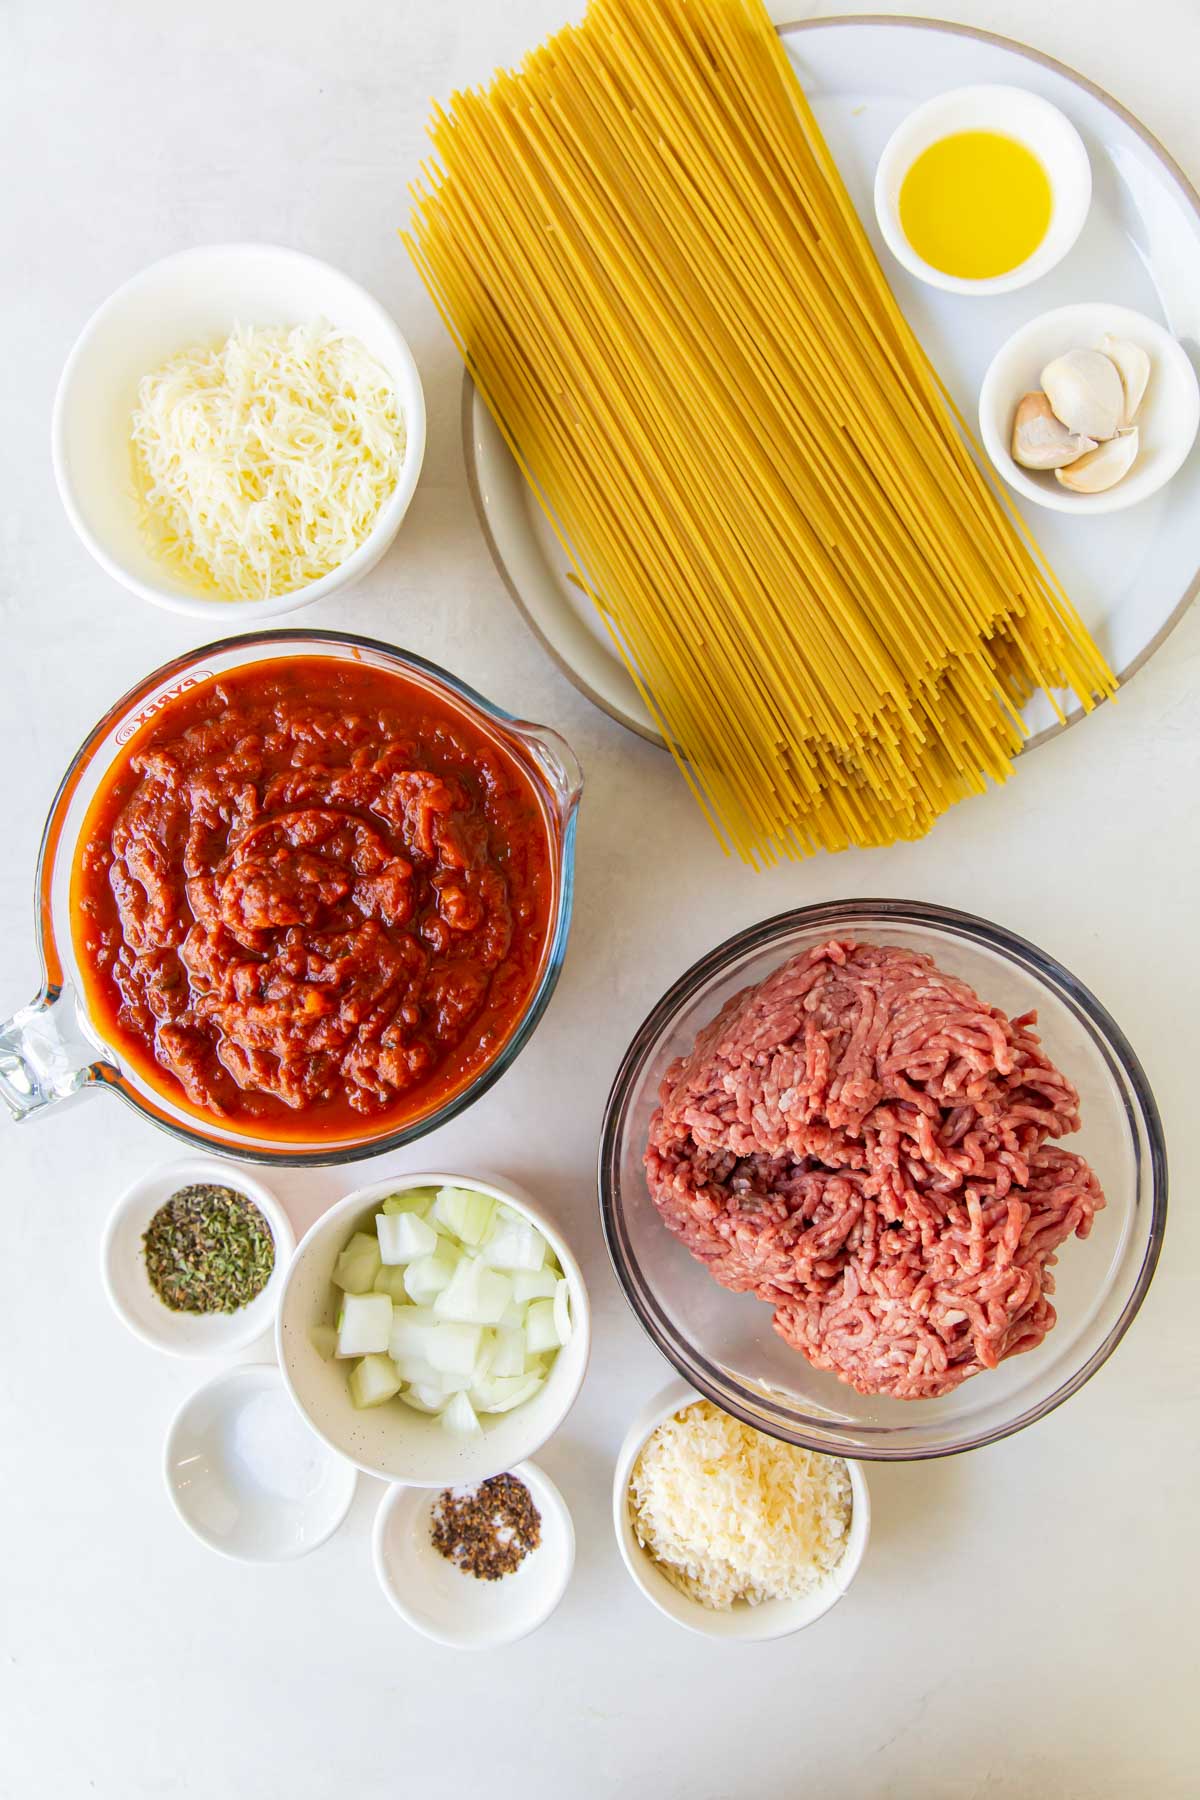 Ingredients for baked spaghetti recipe.